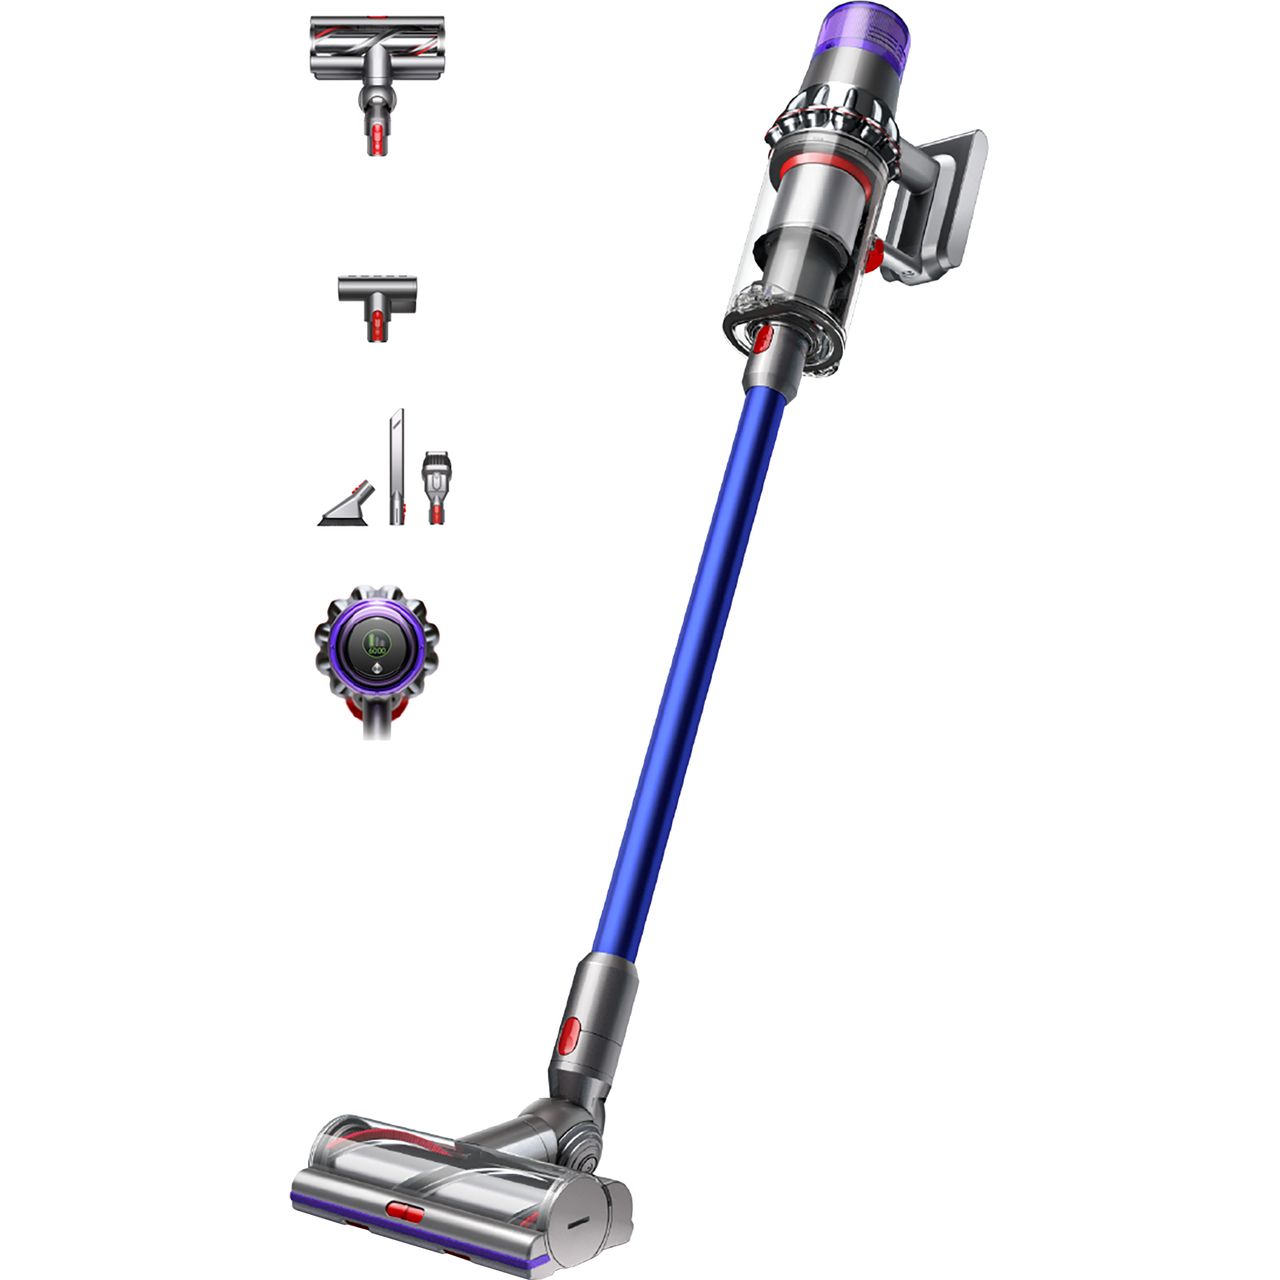 Dyson V11 Absolute Cordless Vacuum Cleaner with up to 60 Minutes Run Time Review